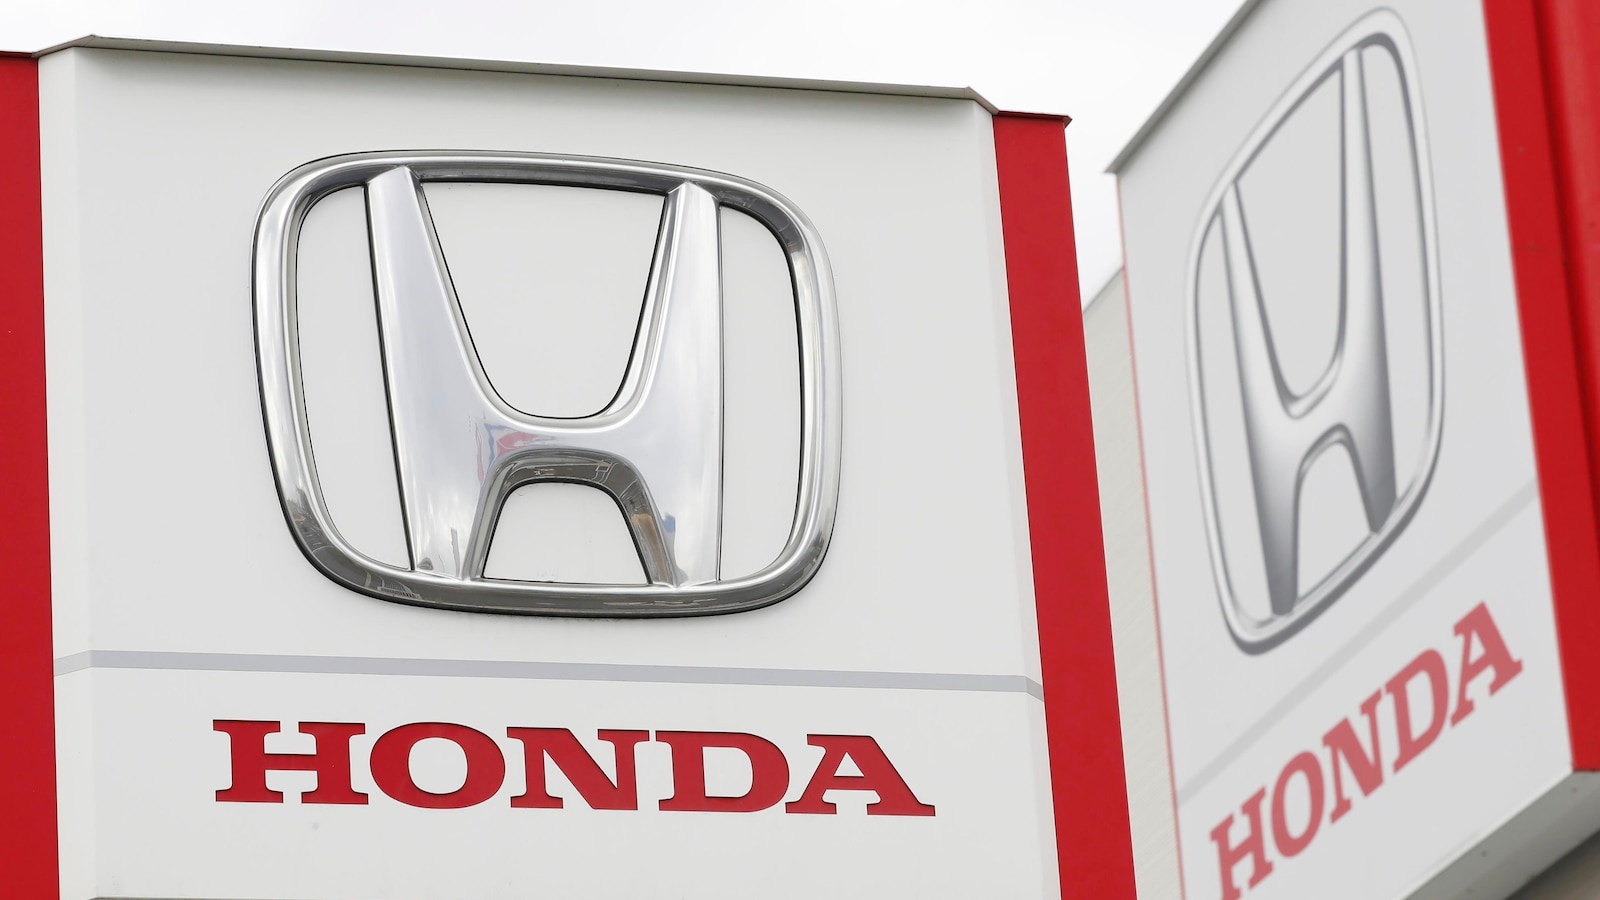 Japanese automaker Honda is stepping up its pace, targeting lucrative American and Chinese markets